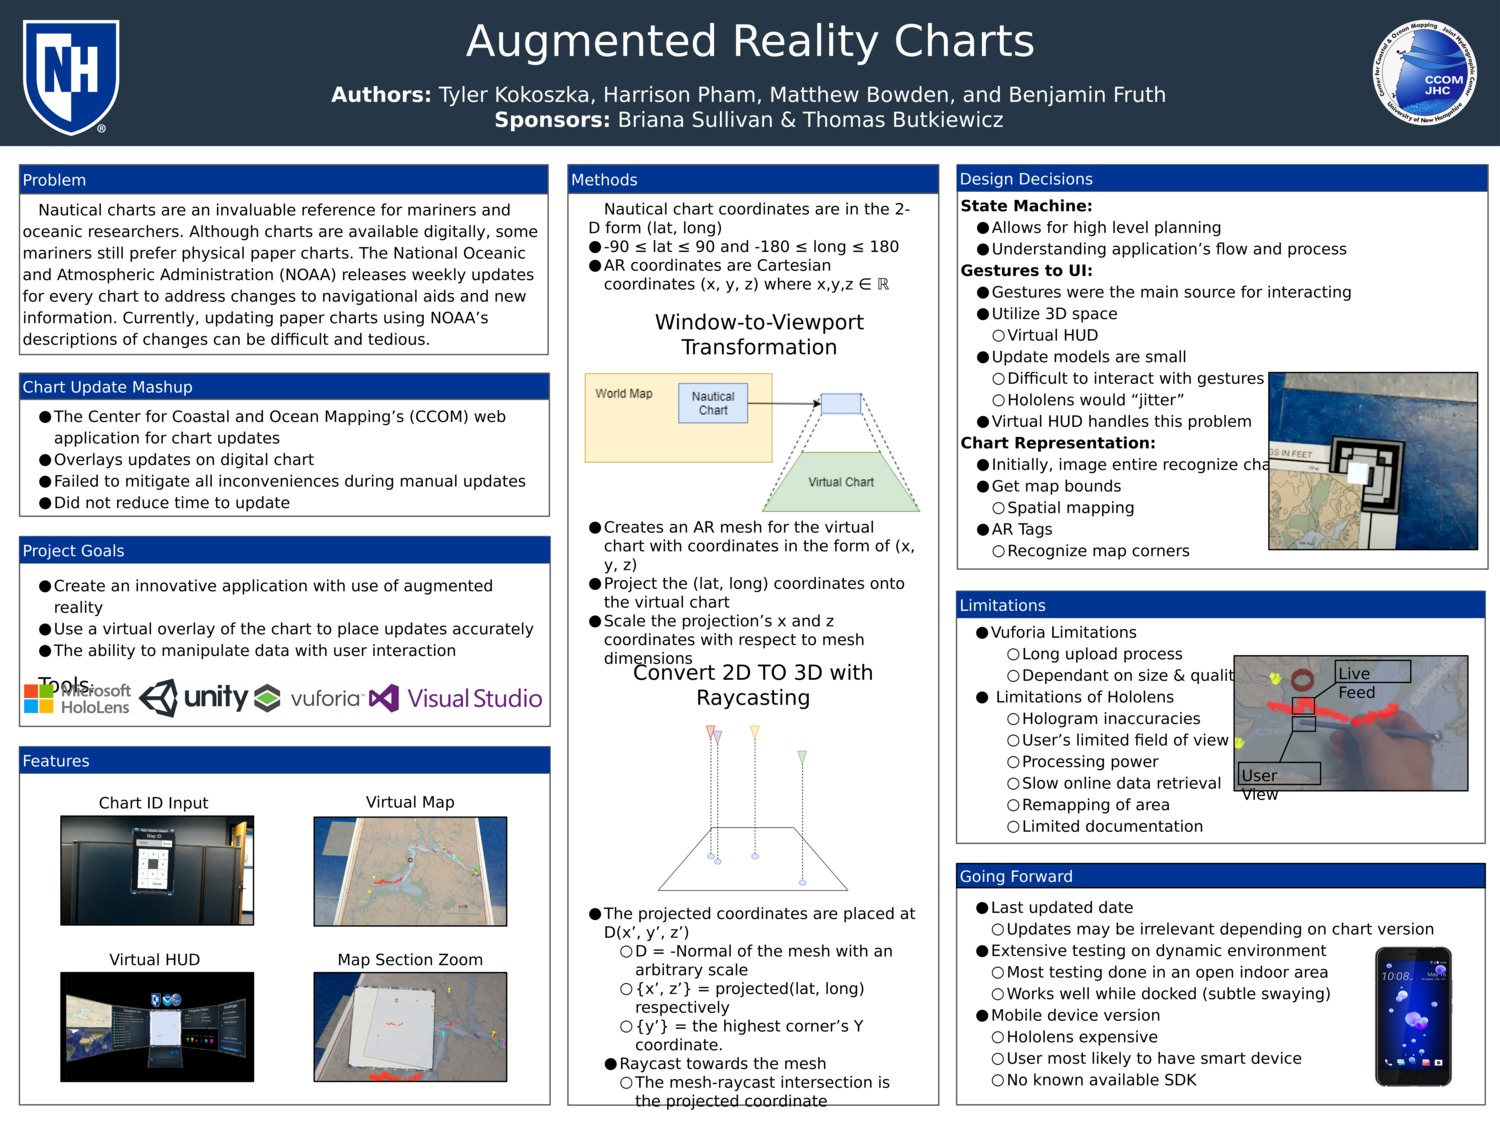 Augmented Reality Charts by hgp2000